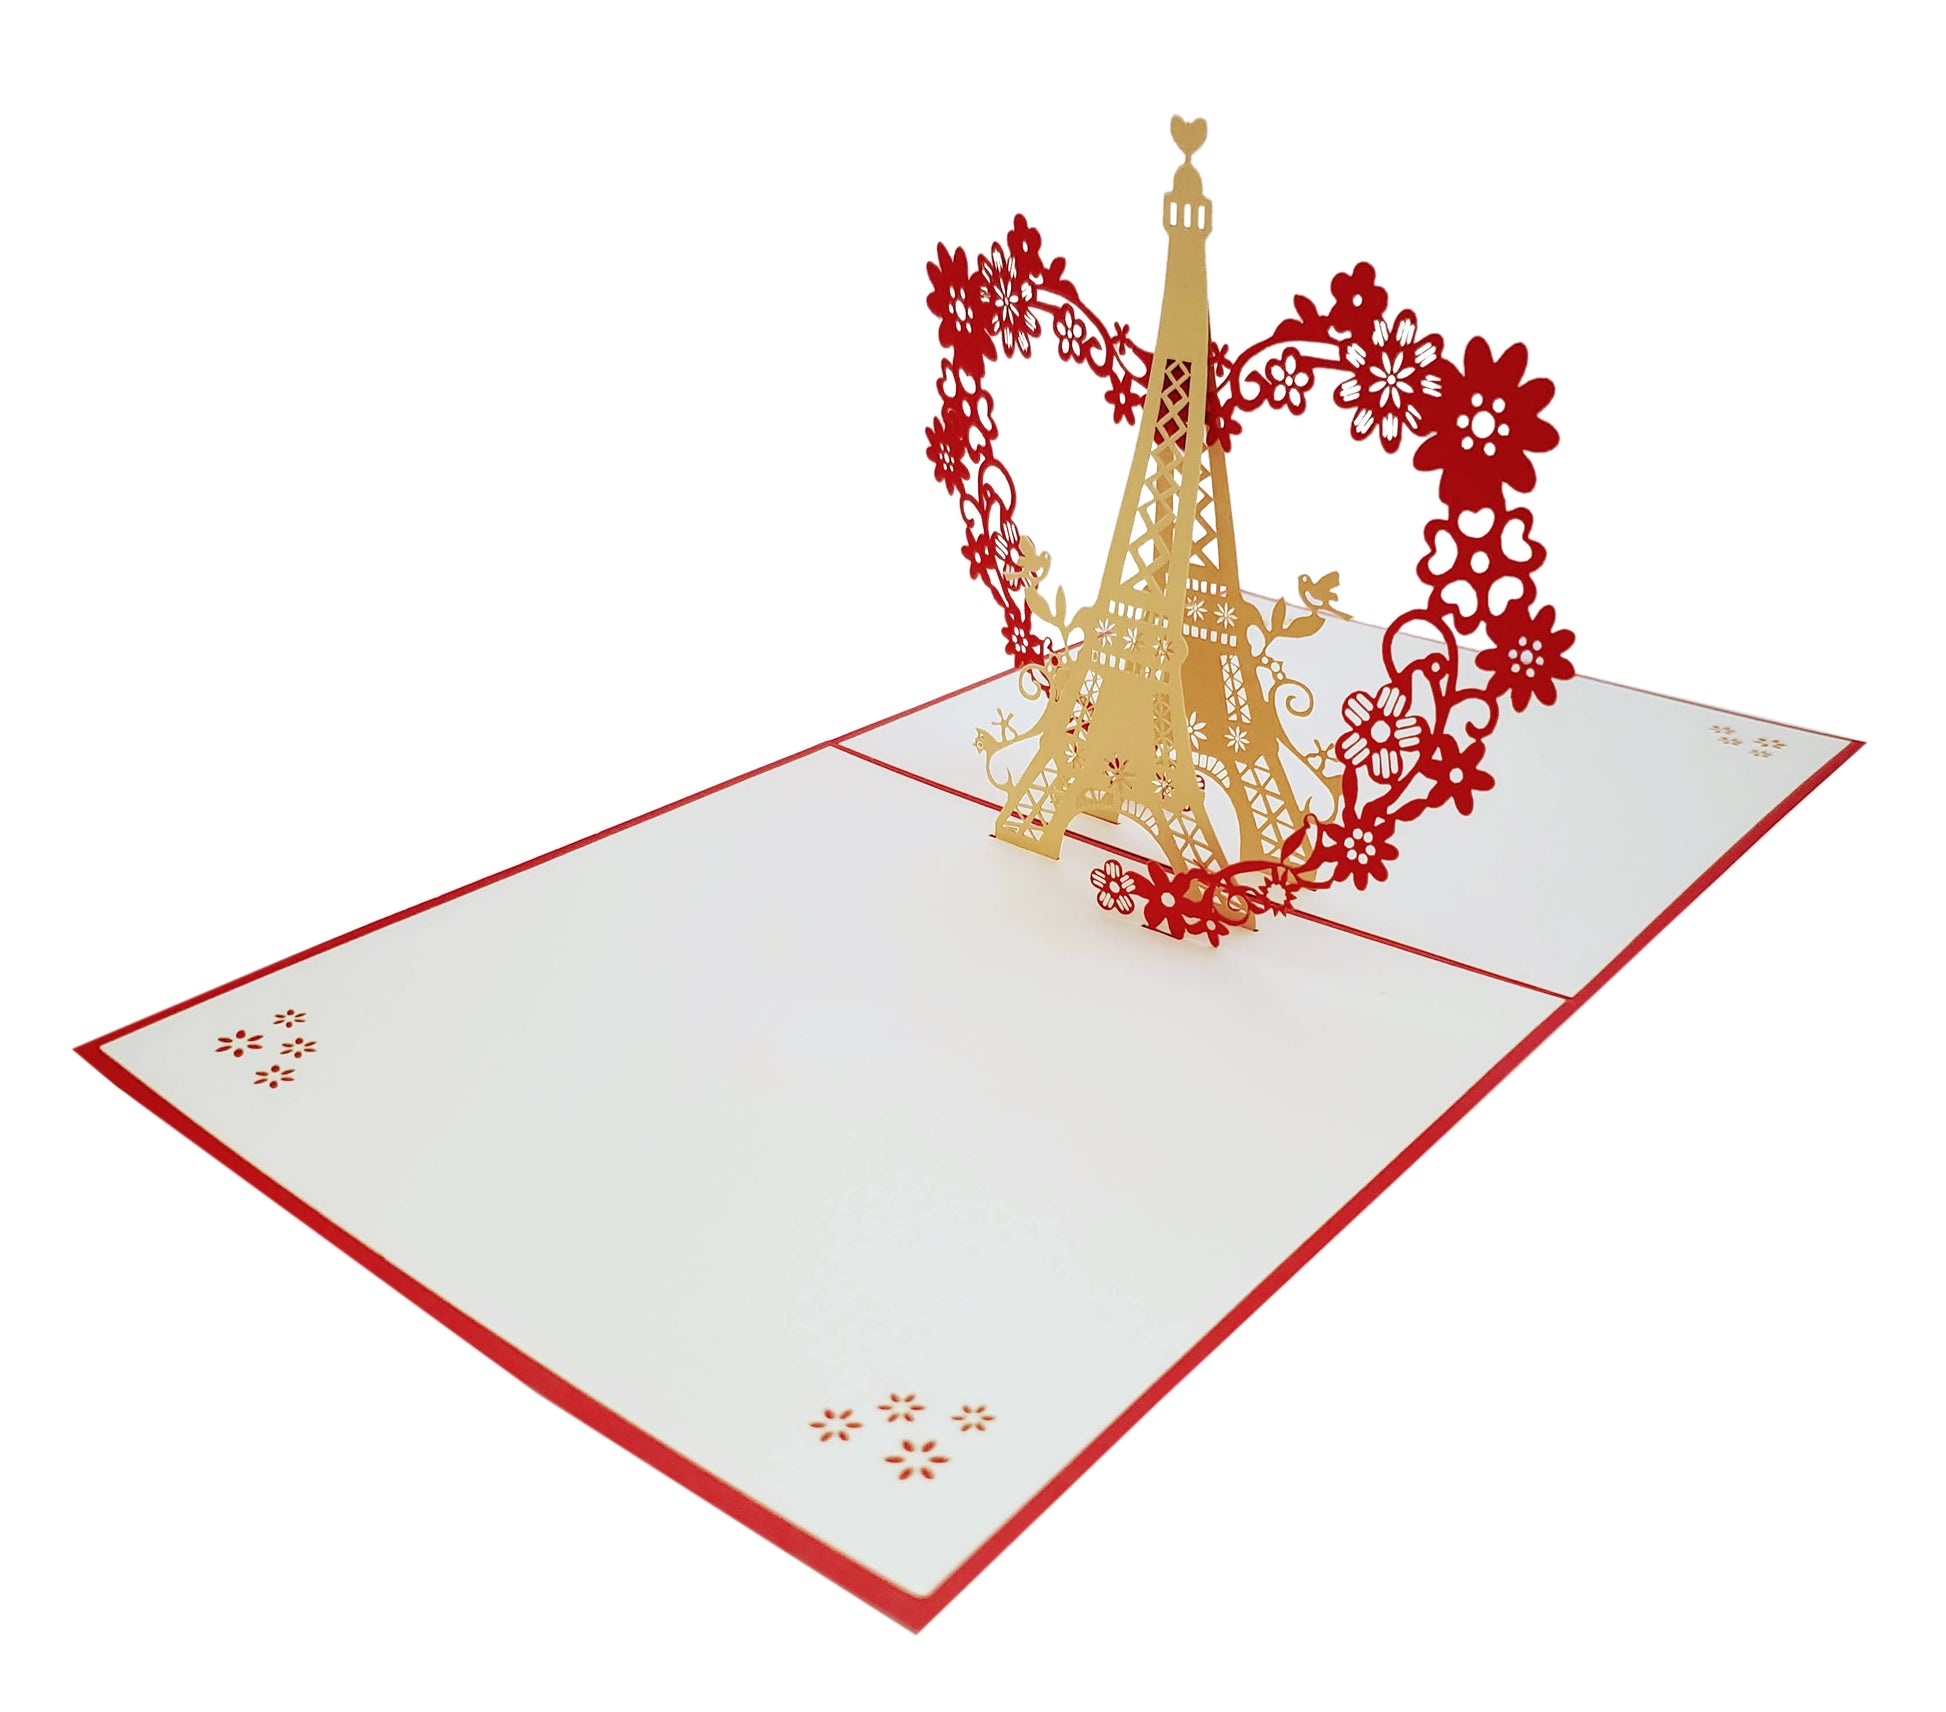 Eiffel With Love 3D Pop Up Greeting Card - Fun - Iconic - Just Because - Special Days - spouse - Val - iGifts And Cards